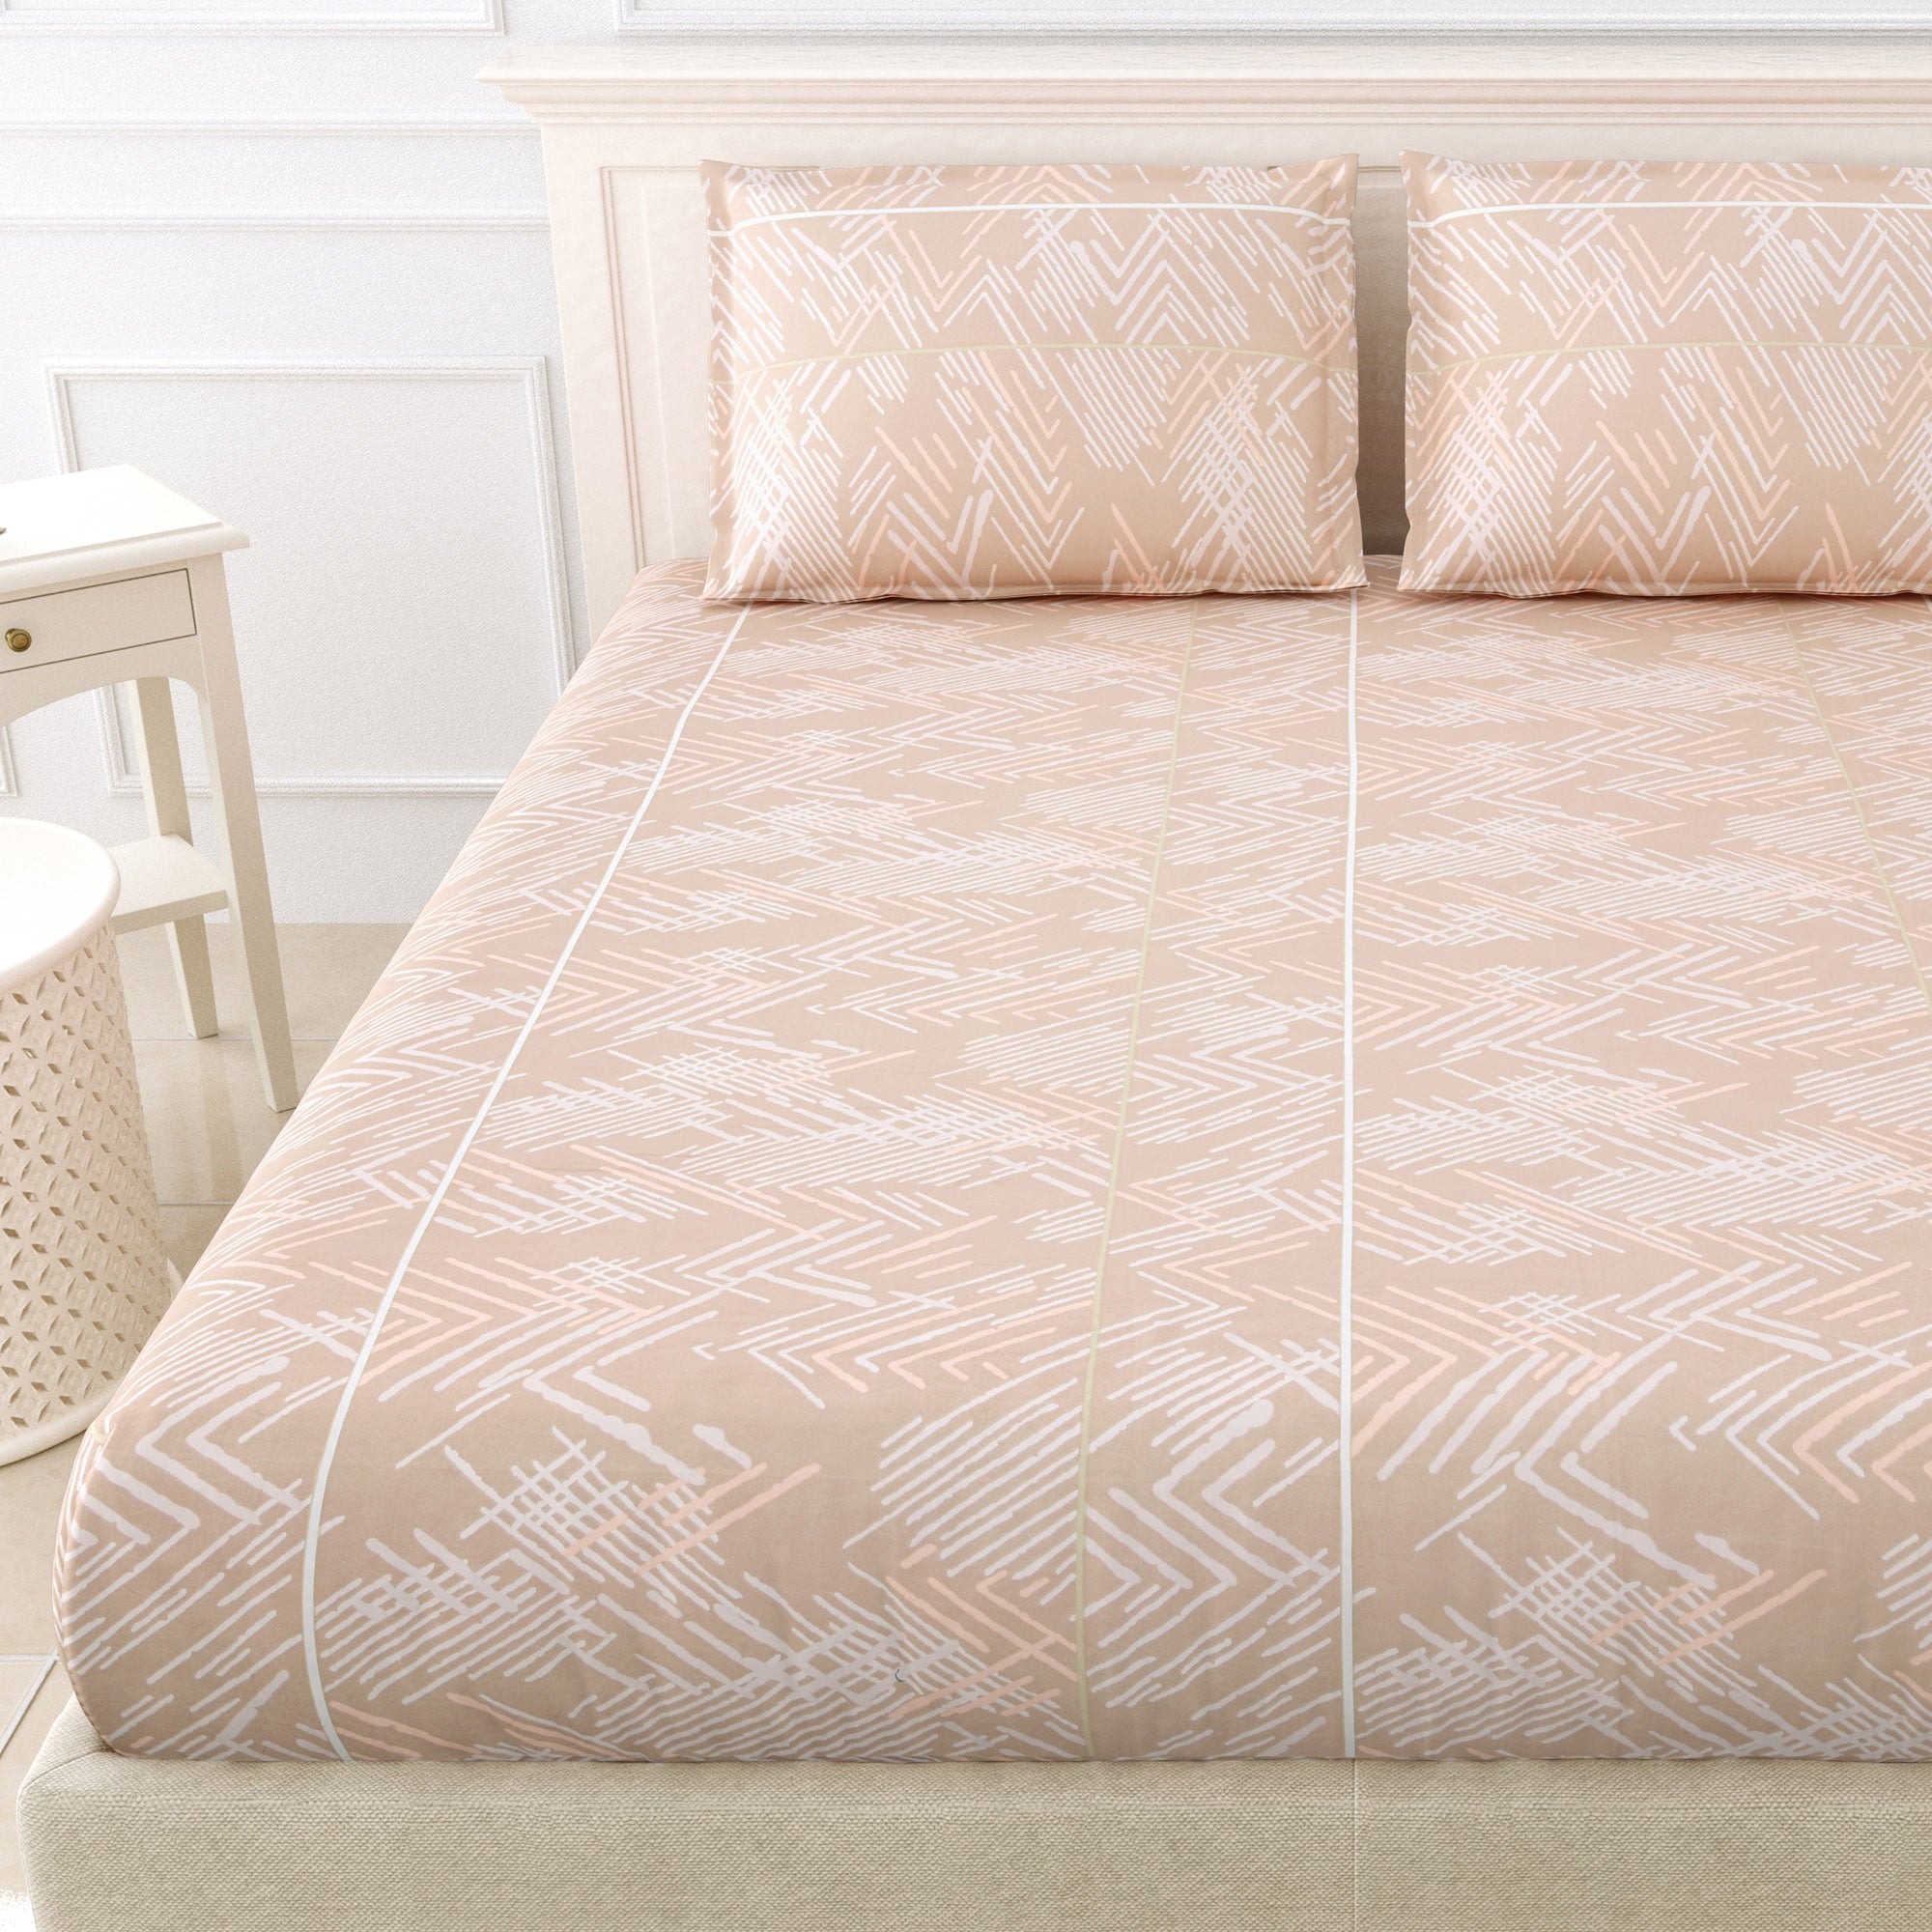 eCraftIndia 250 TC Peach White Abstract Printed Cotton Double Bedsheet With 2 Pillow Covers 2